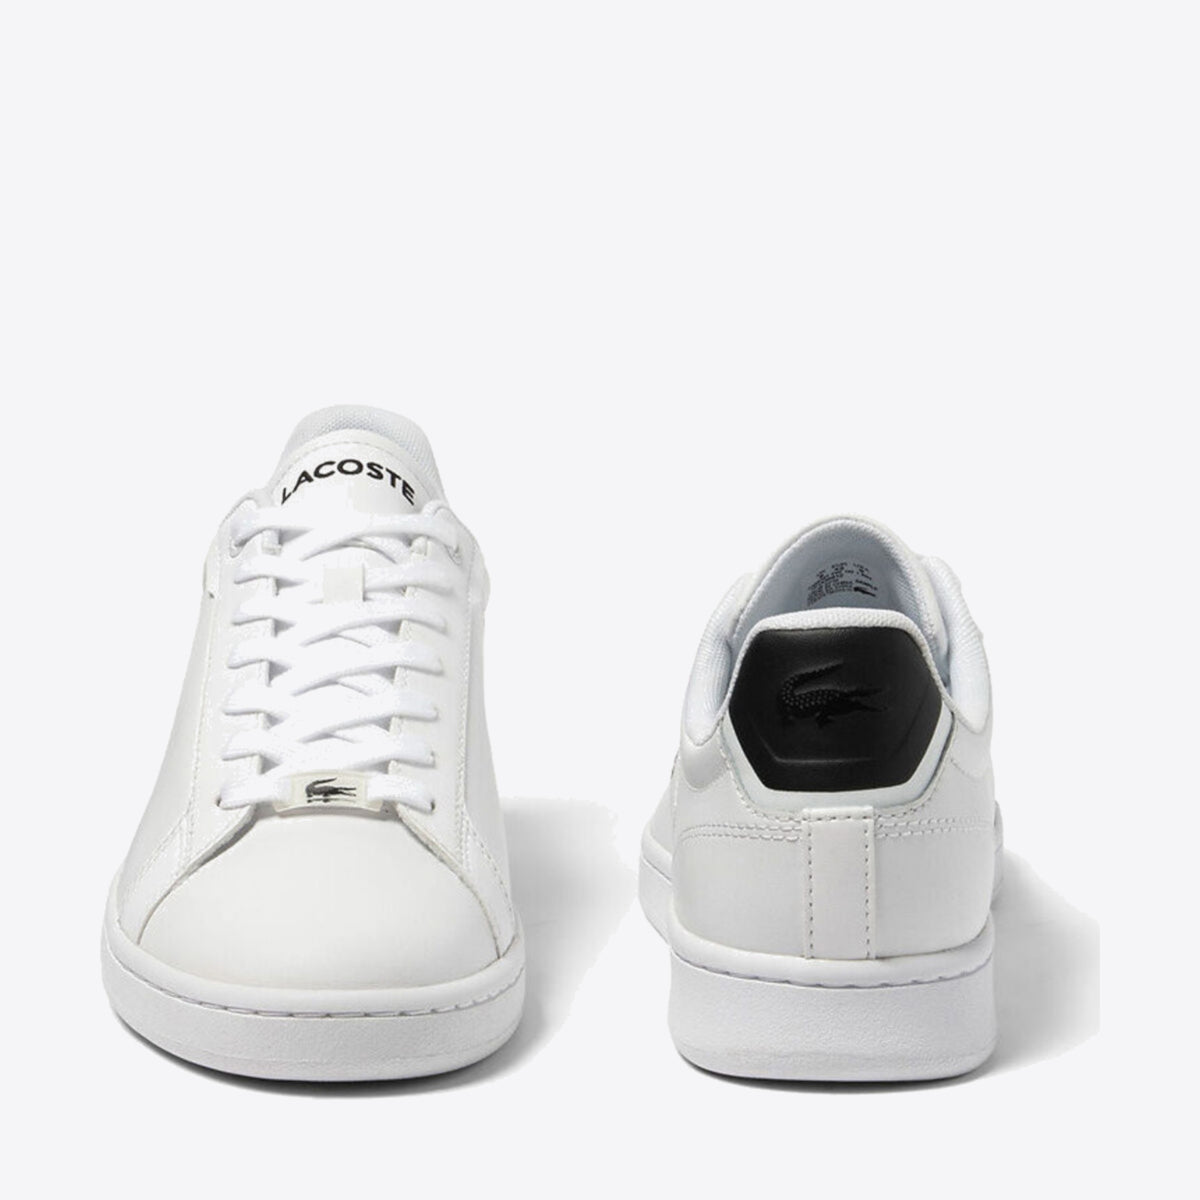 LACOSTE Carnaby Pro 123 White/Black - Image 5